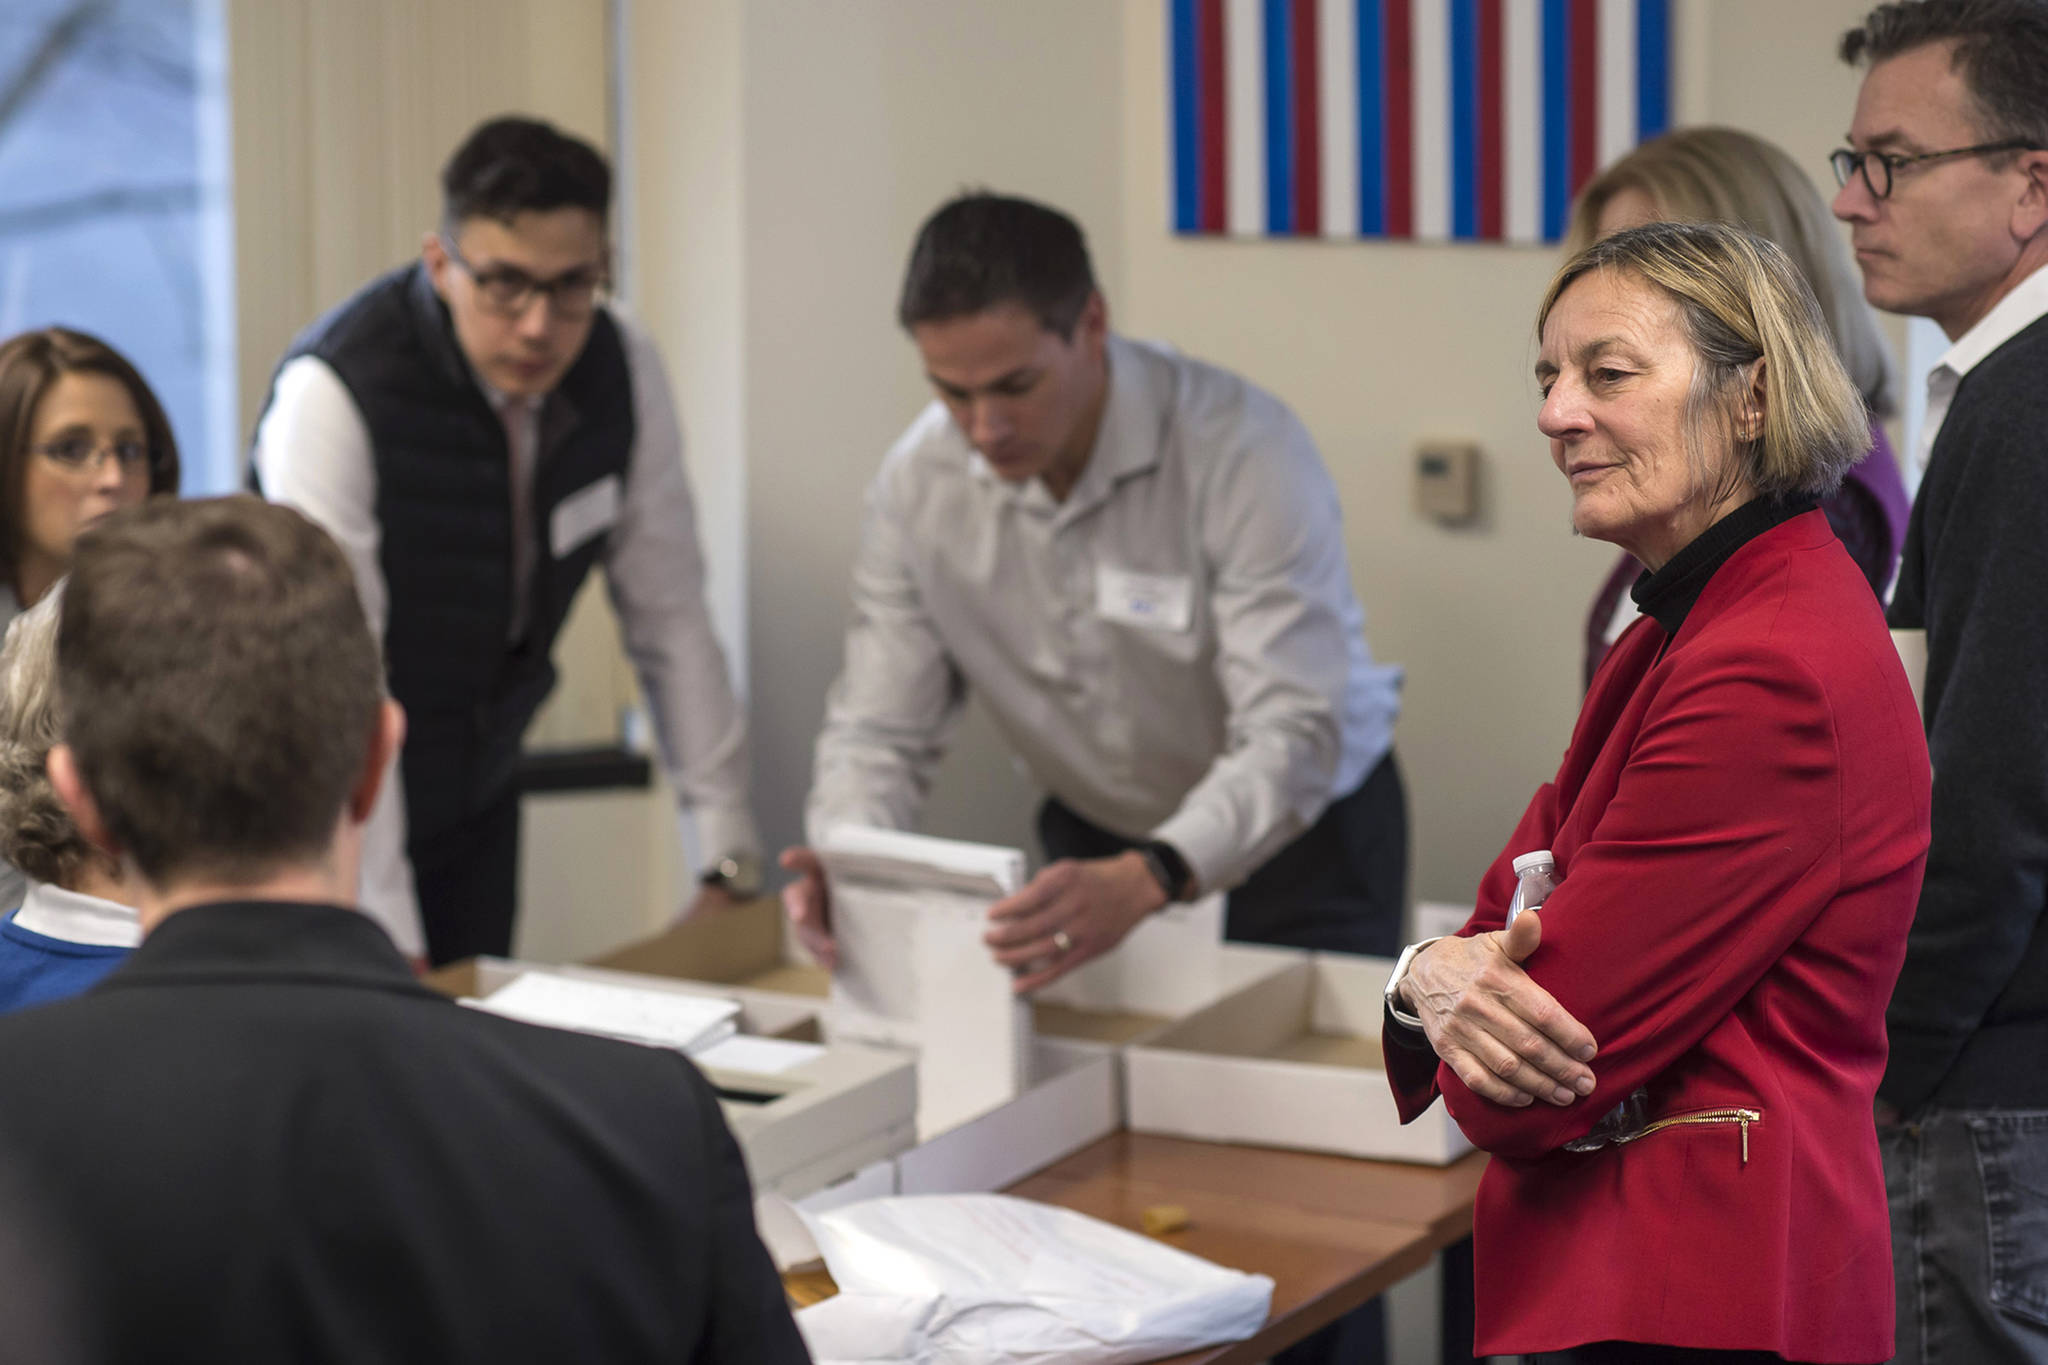 In this Nov. 30, 2018 file photo, Alaska House District 1 candidate Democrat Kathryn Dodge, right, watches the election recount at the Department of Elections’ Juneau, Alaska office. The Democrat who lost a recount by one vote in a contested Alaska House race must decide by Wednesday whether to challenge the results. Kathryn Dodge, in a statement late Tuesday, Dec. 4, 2018, says she and her team were reviewing decisions made by the Division of Elections. She says she disagrees with some of the decisions but wants to “look at everything” before making a final decision. (Michael Penn/The Juneau Empire via AP, File)